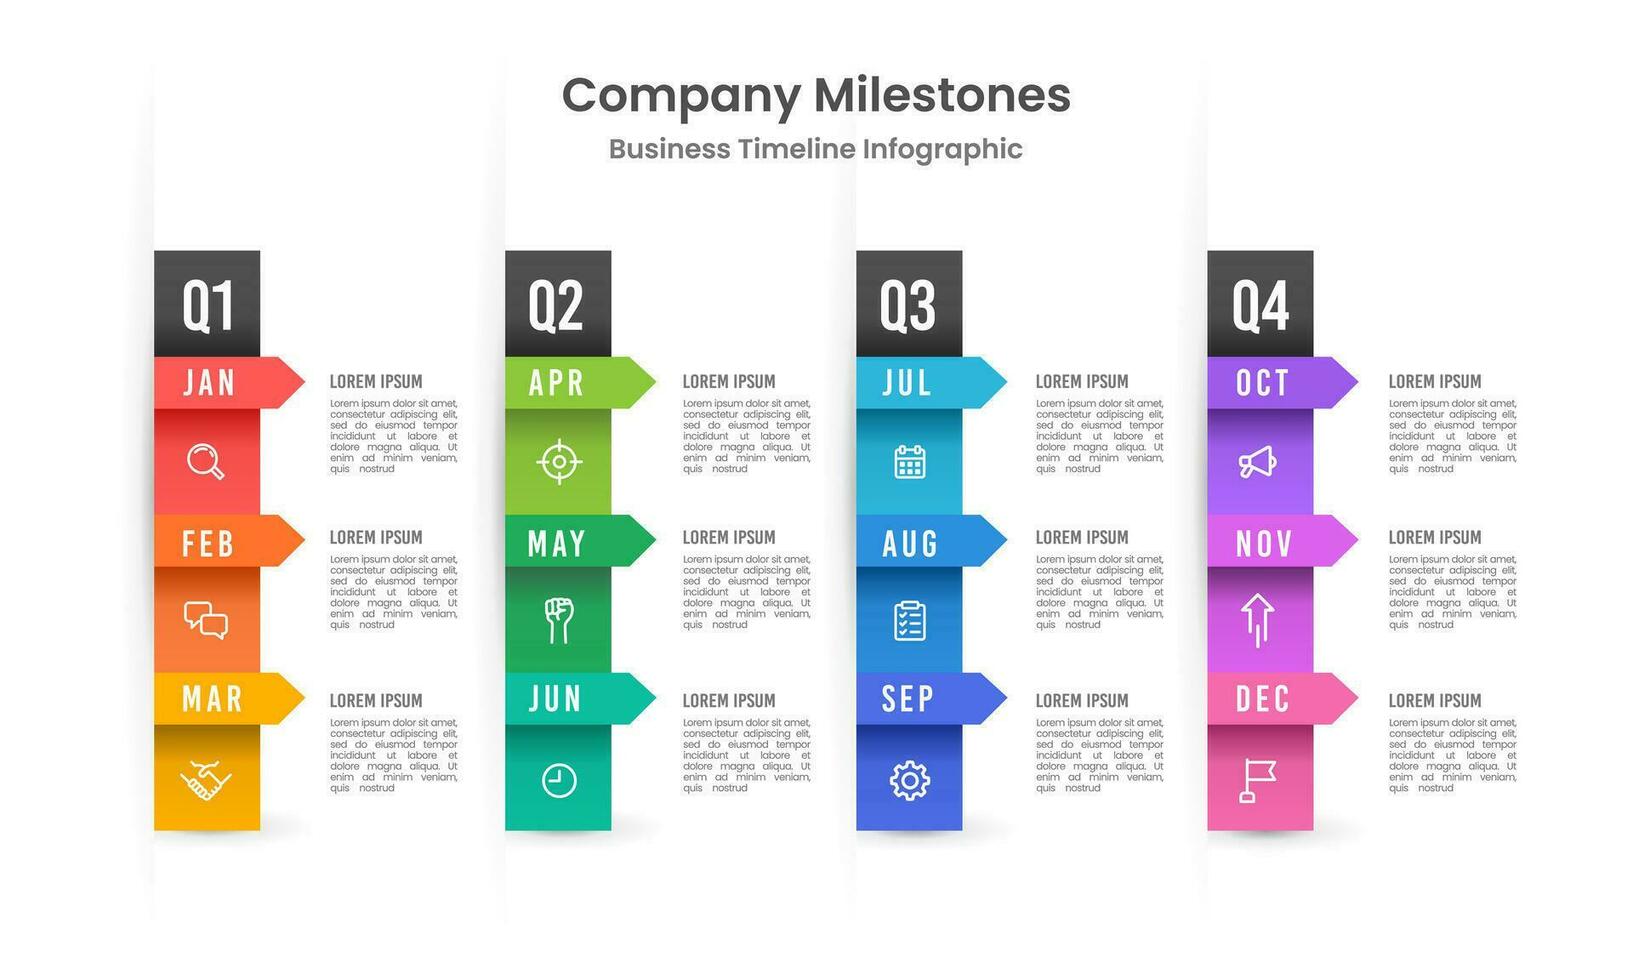 Presentation of the business timeline for one year, divided into quarters. Vector illustration.